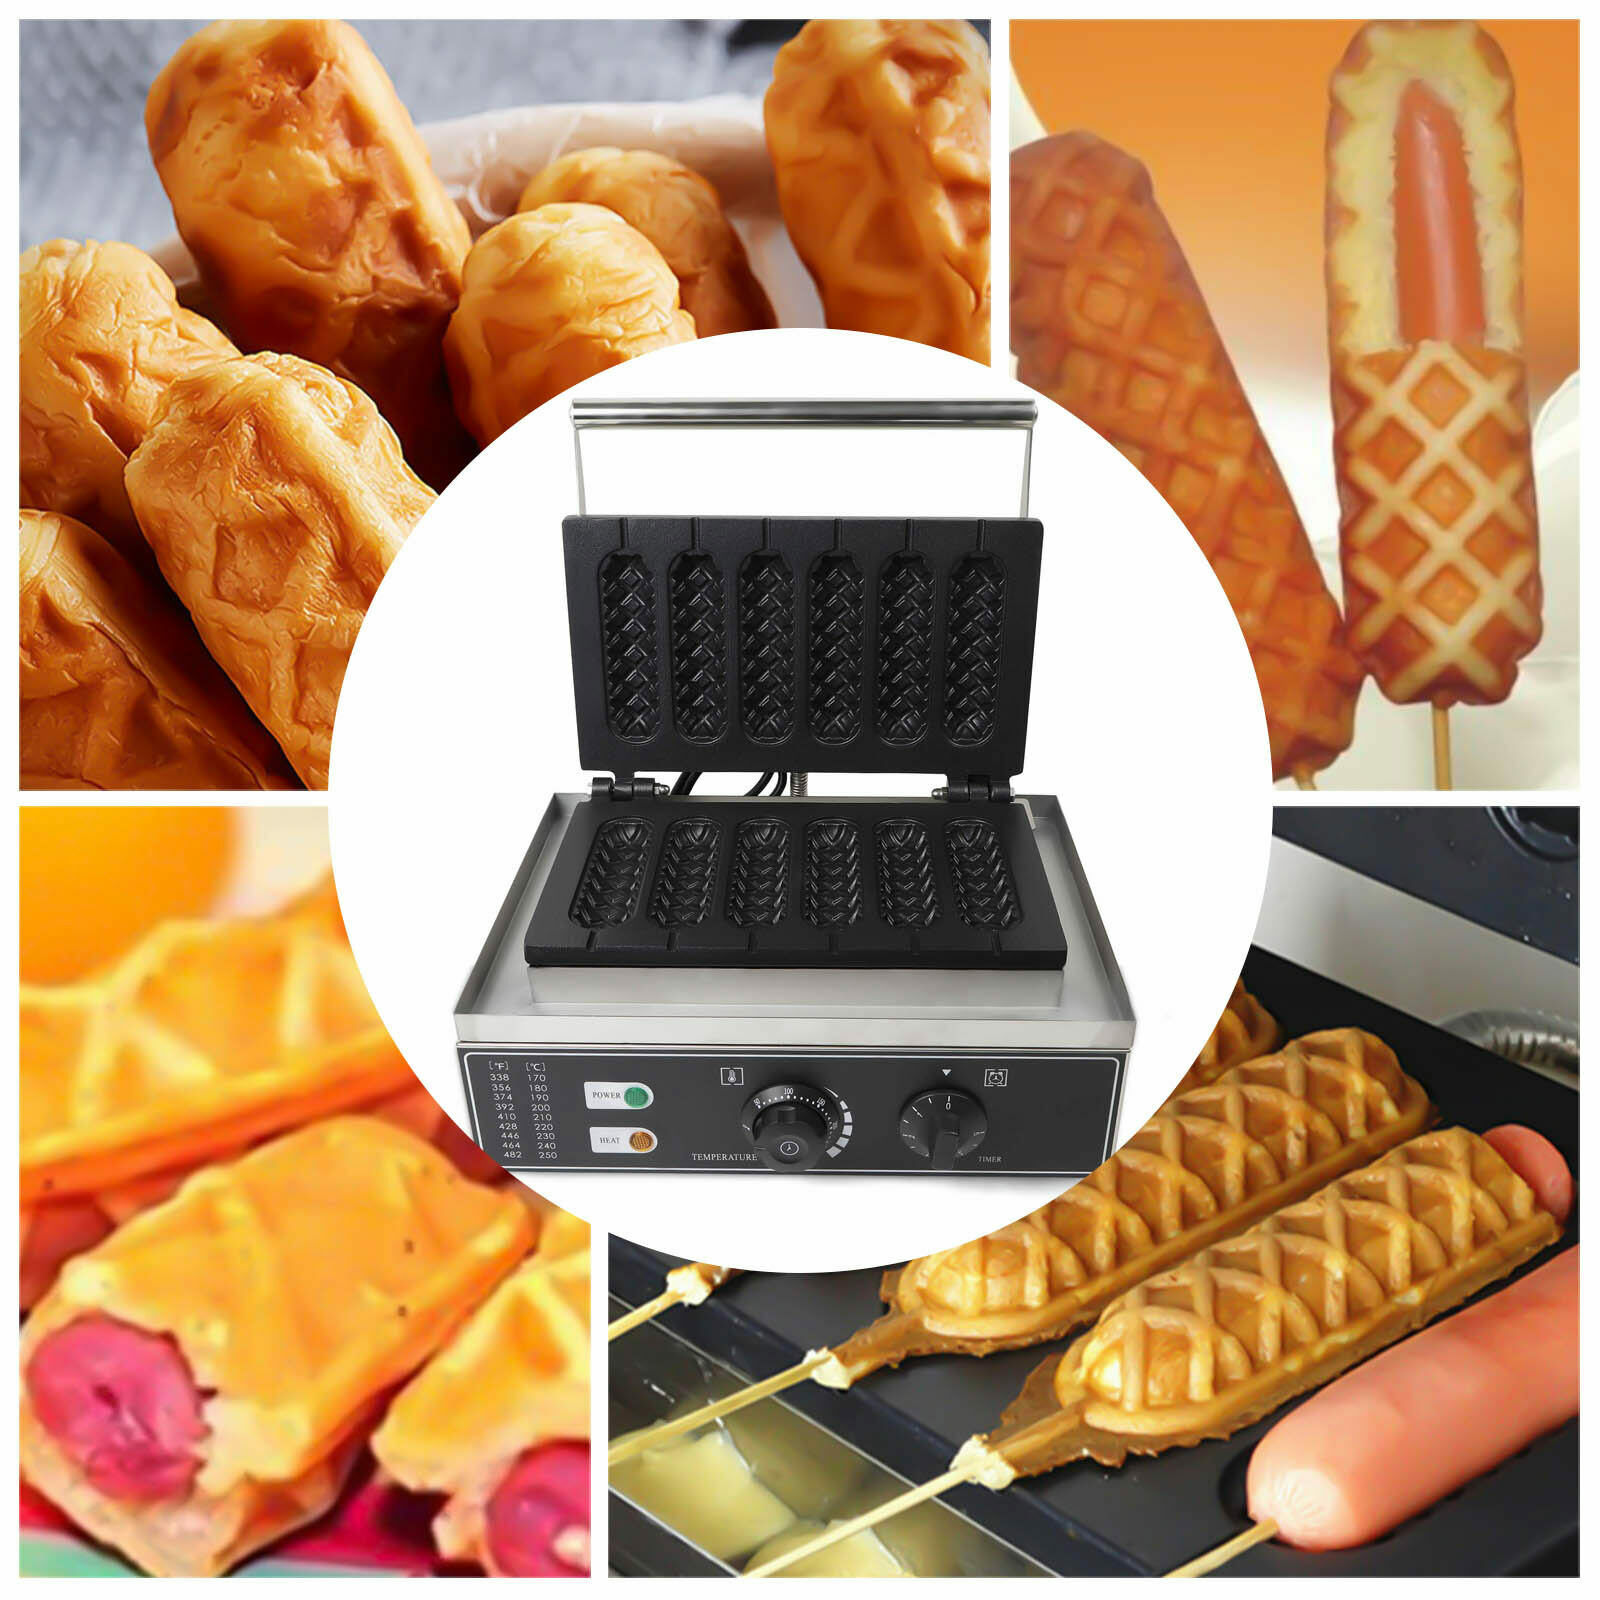 Oukaning 1500W Grid Commercial Non Stick Waffle Maker Hot Dog Maker（15.16  x 10.83 x 8.86 inch）